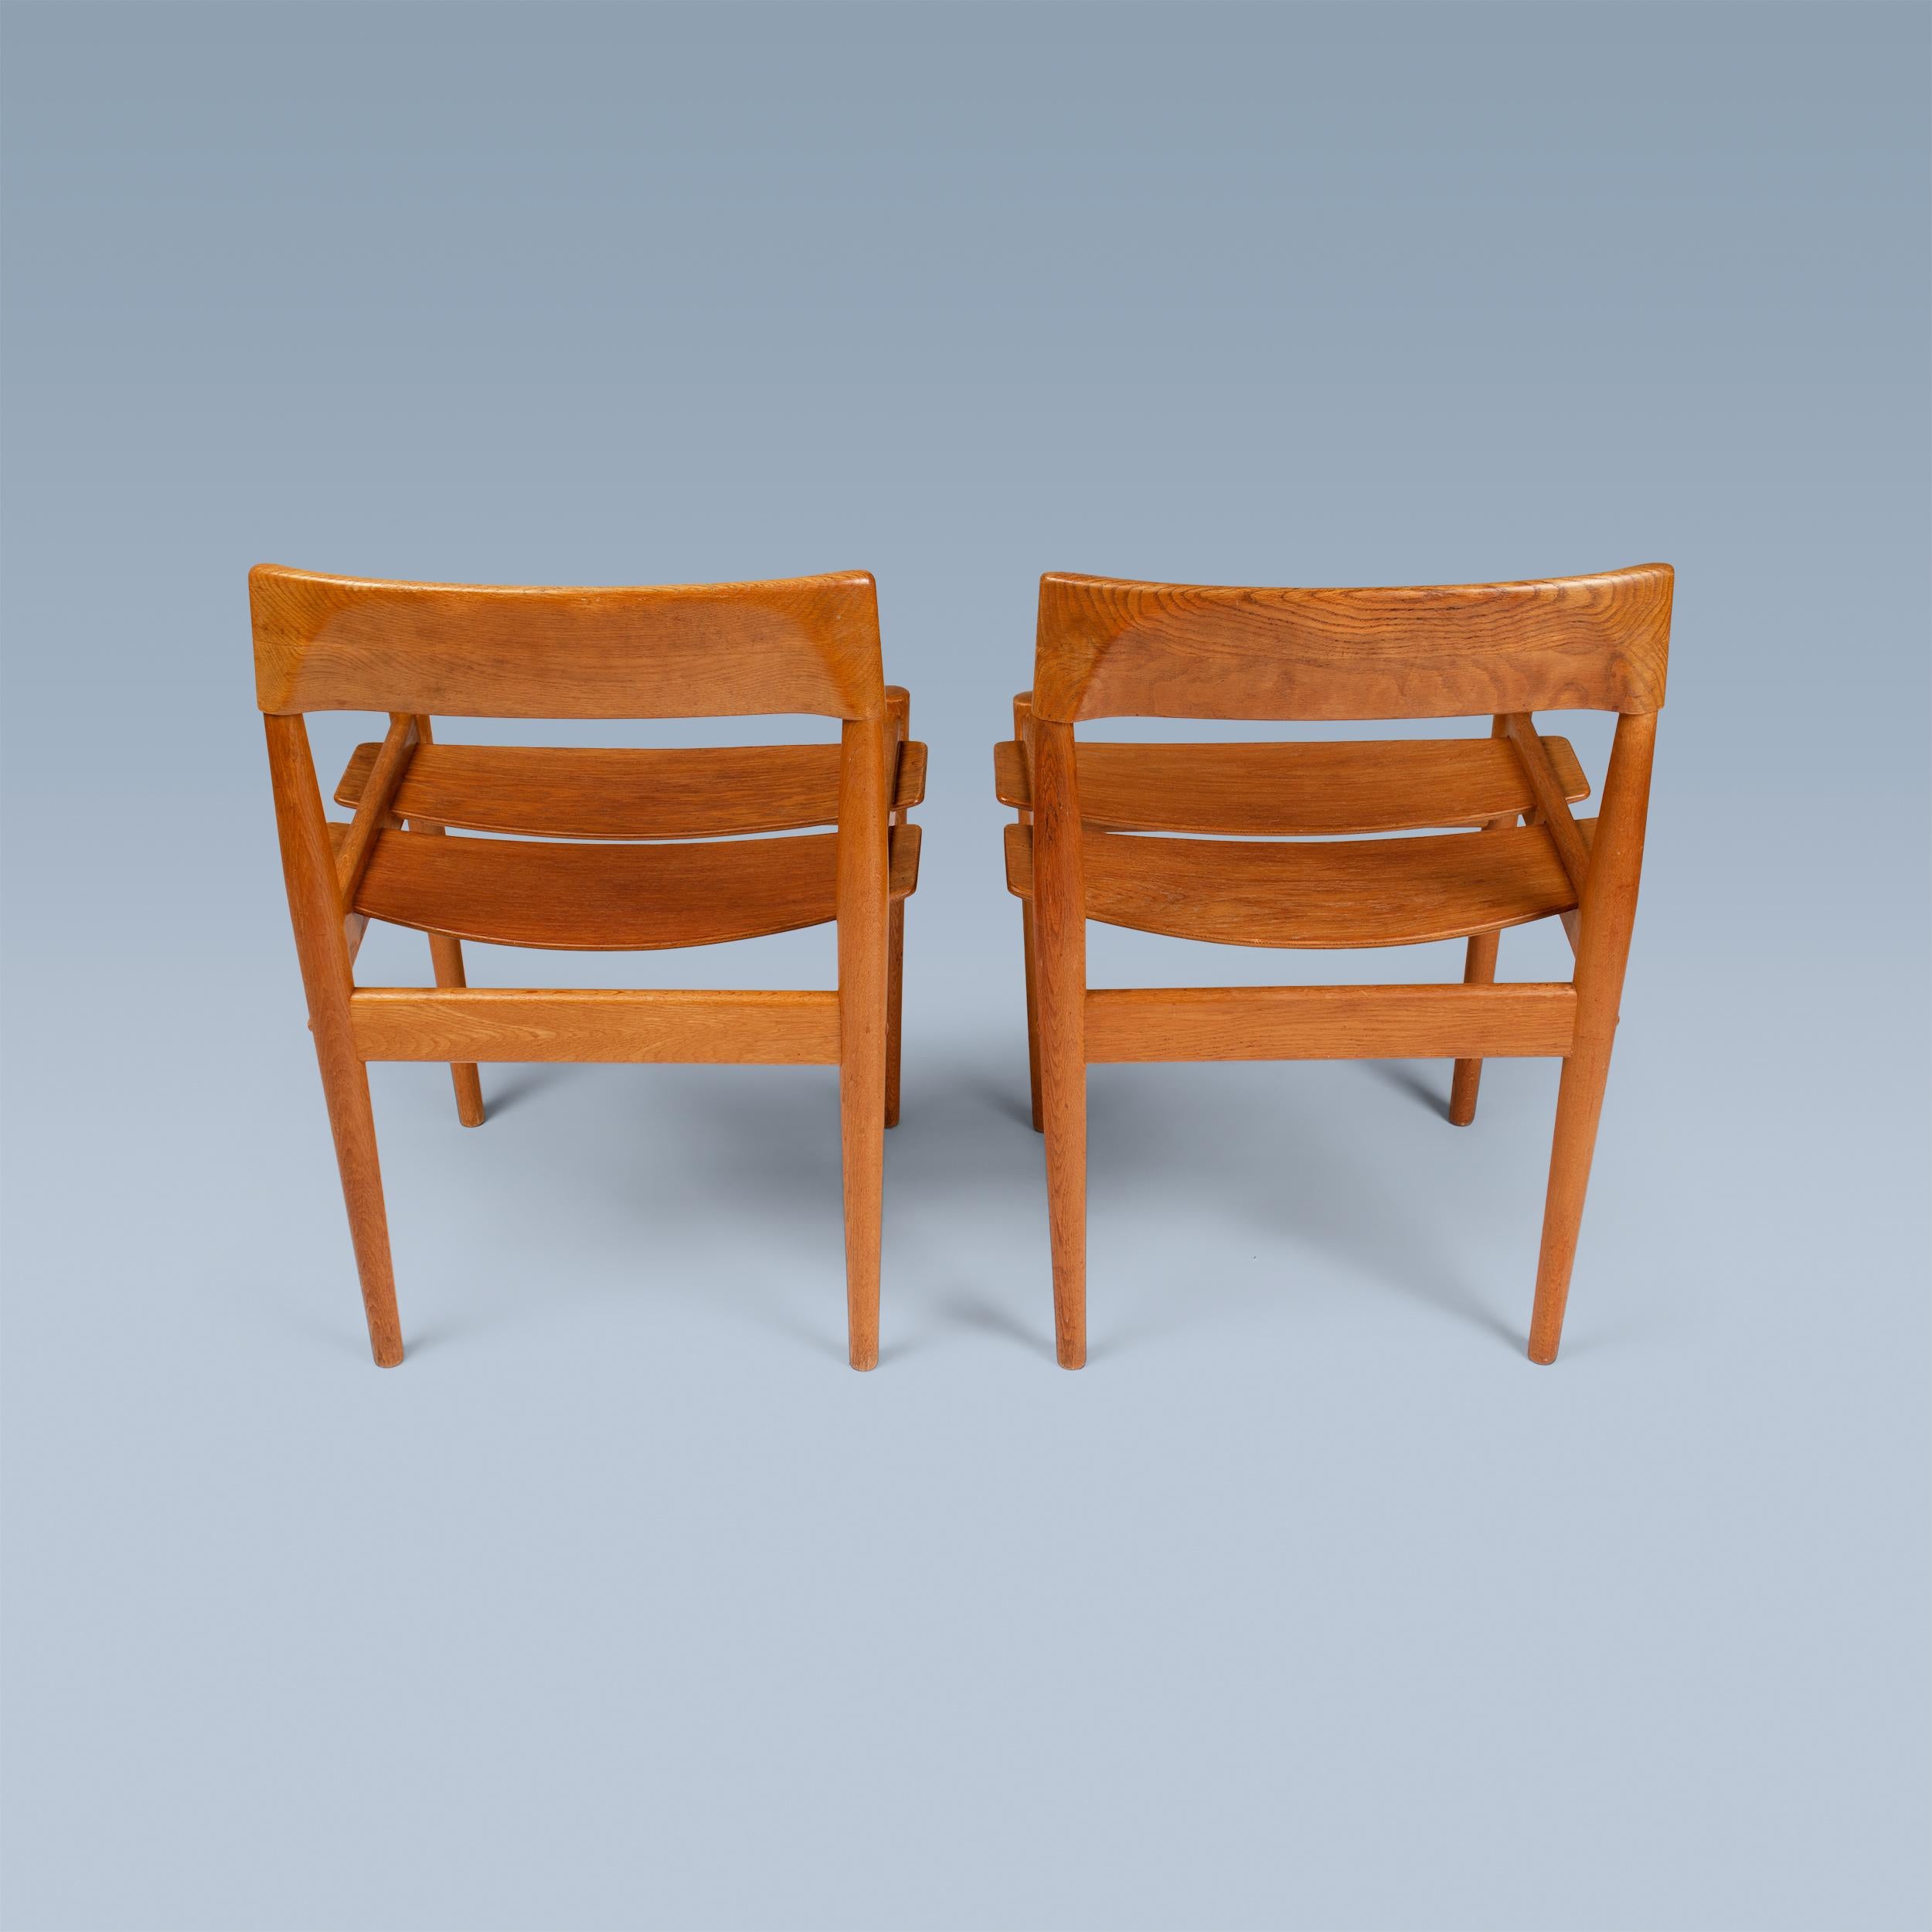 Rare pair of Danish modern fumed oak side chairs For Sale 1